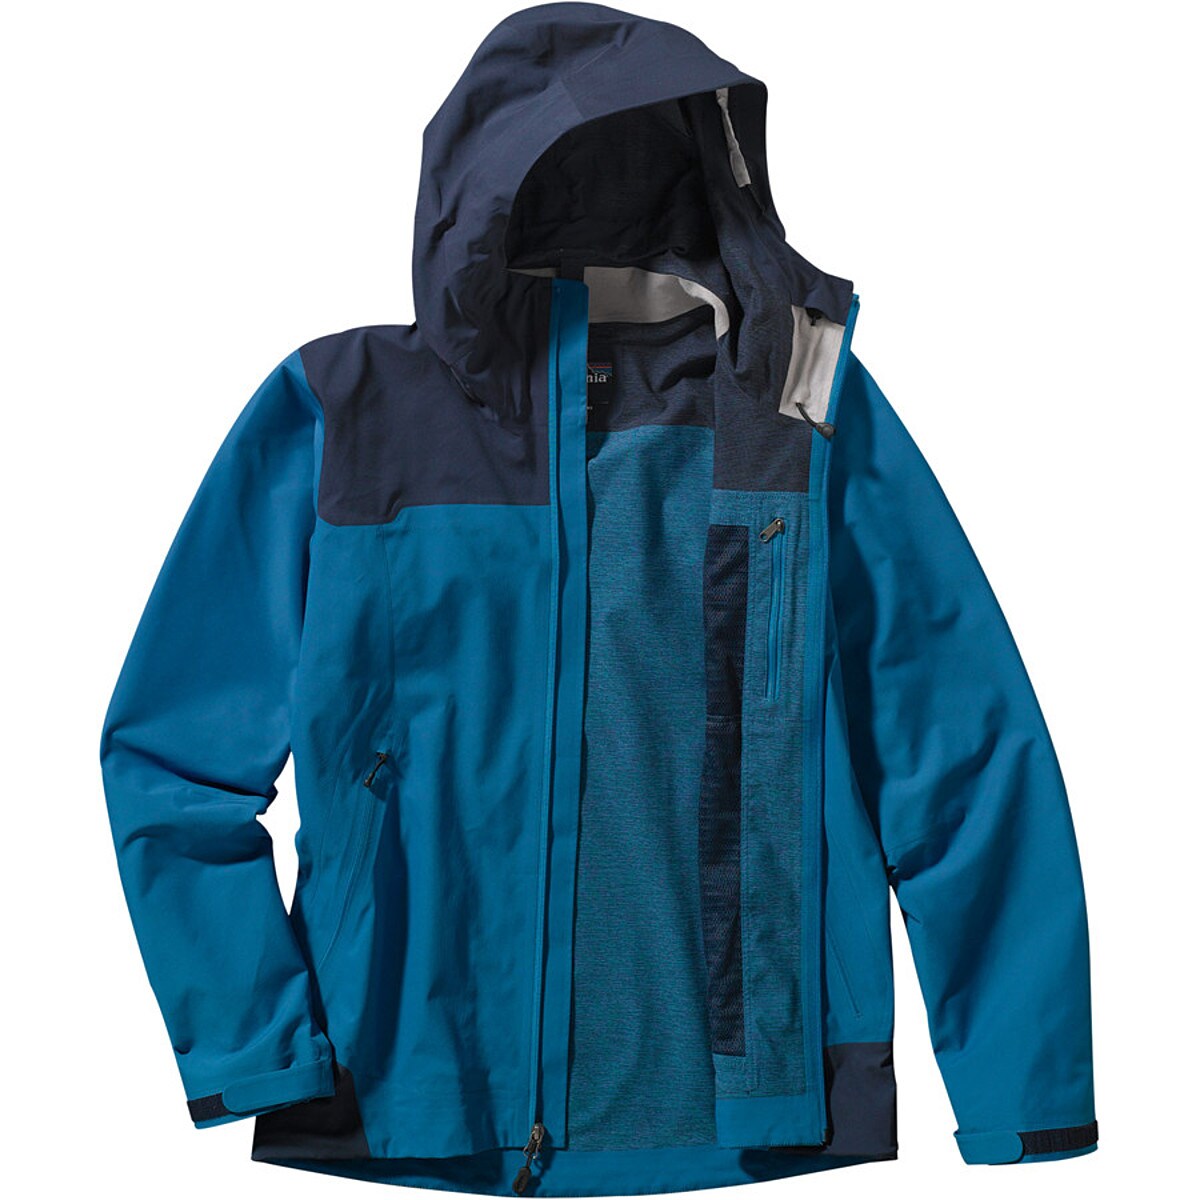 Patagonia Ascensionist Softshell Jacket - Men's - Clothing